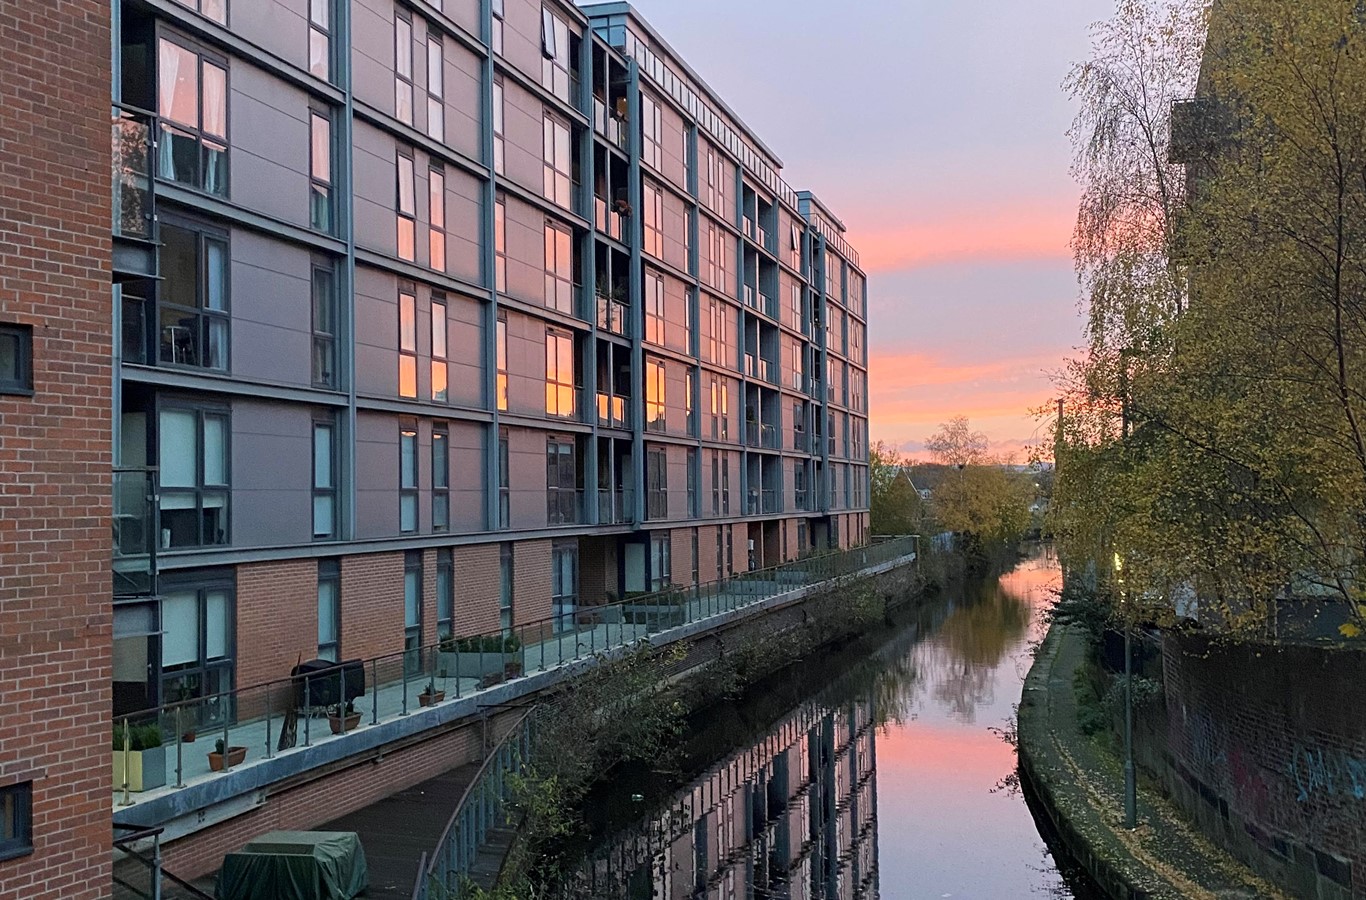 Flint Glass Wharf apartments next to Rochdale Canal at sunset